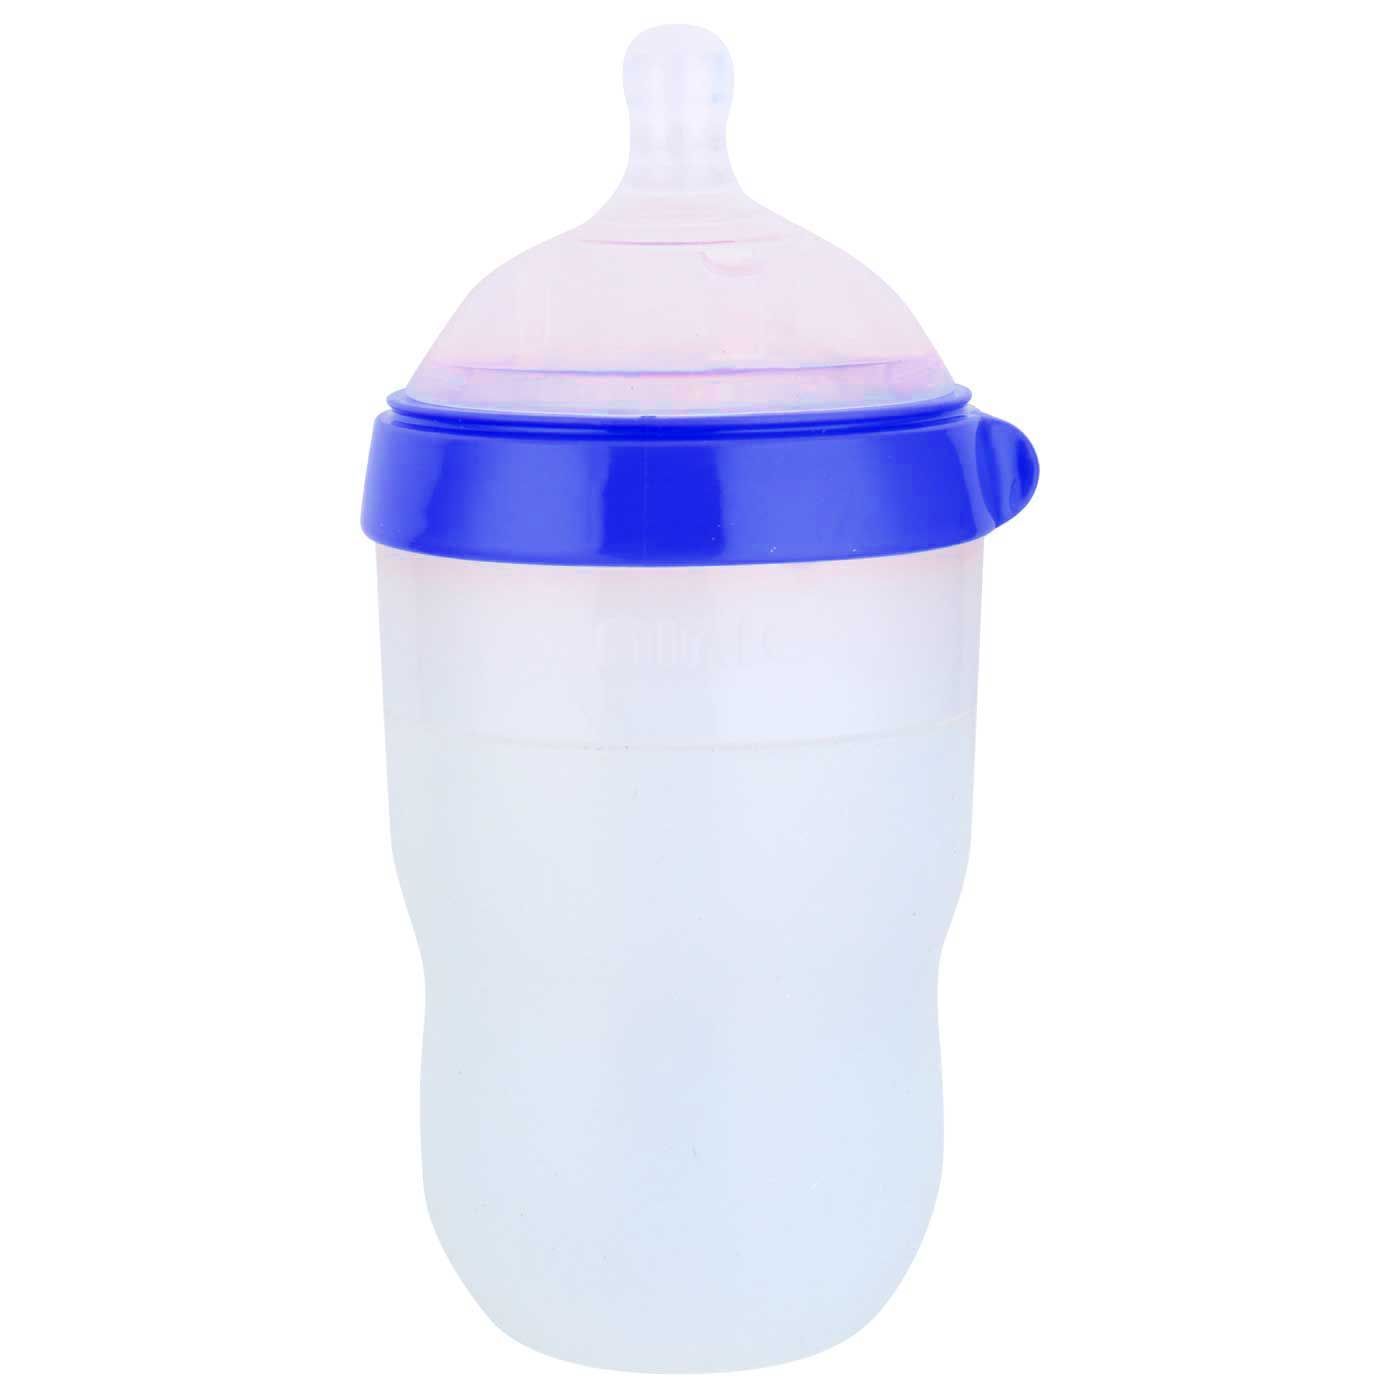 Ninio Silicone Bottle with Filter 7oz Blue - 2